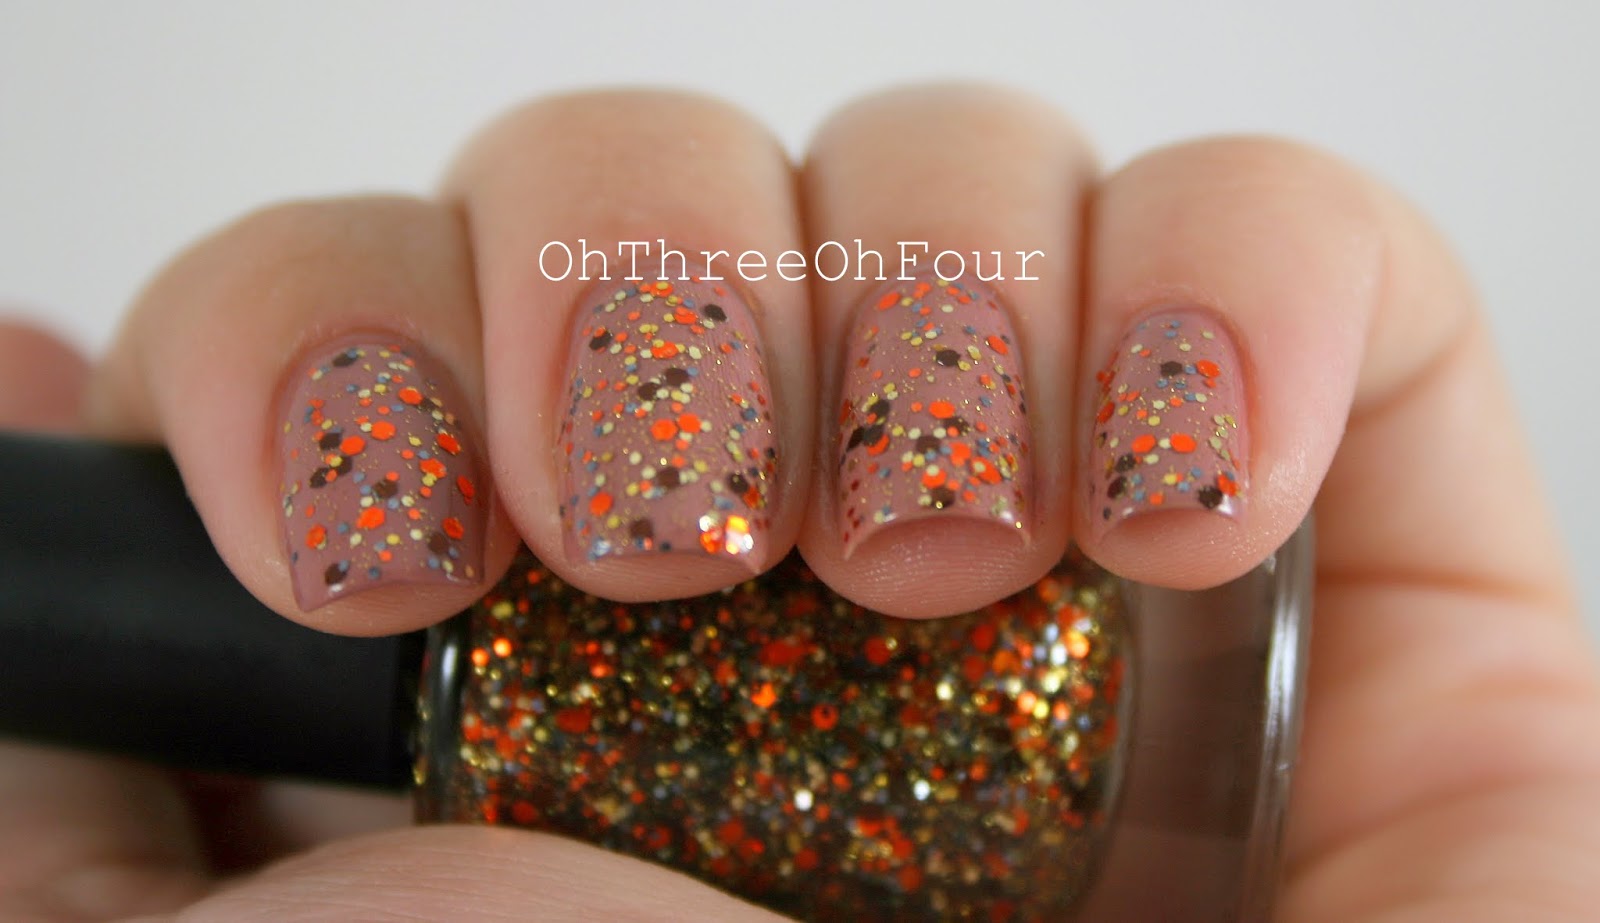 Oh Three Oh Four: I Love Nail Polish Goldie Boo... Boo! Review & Swatches